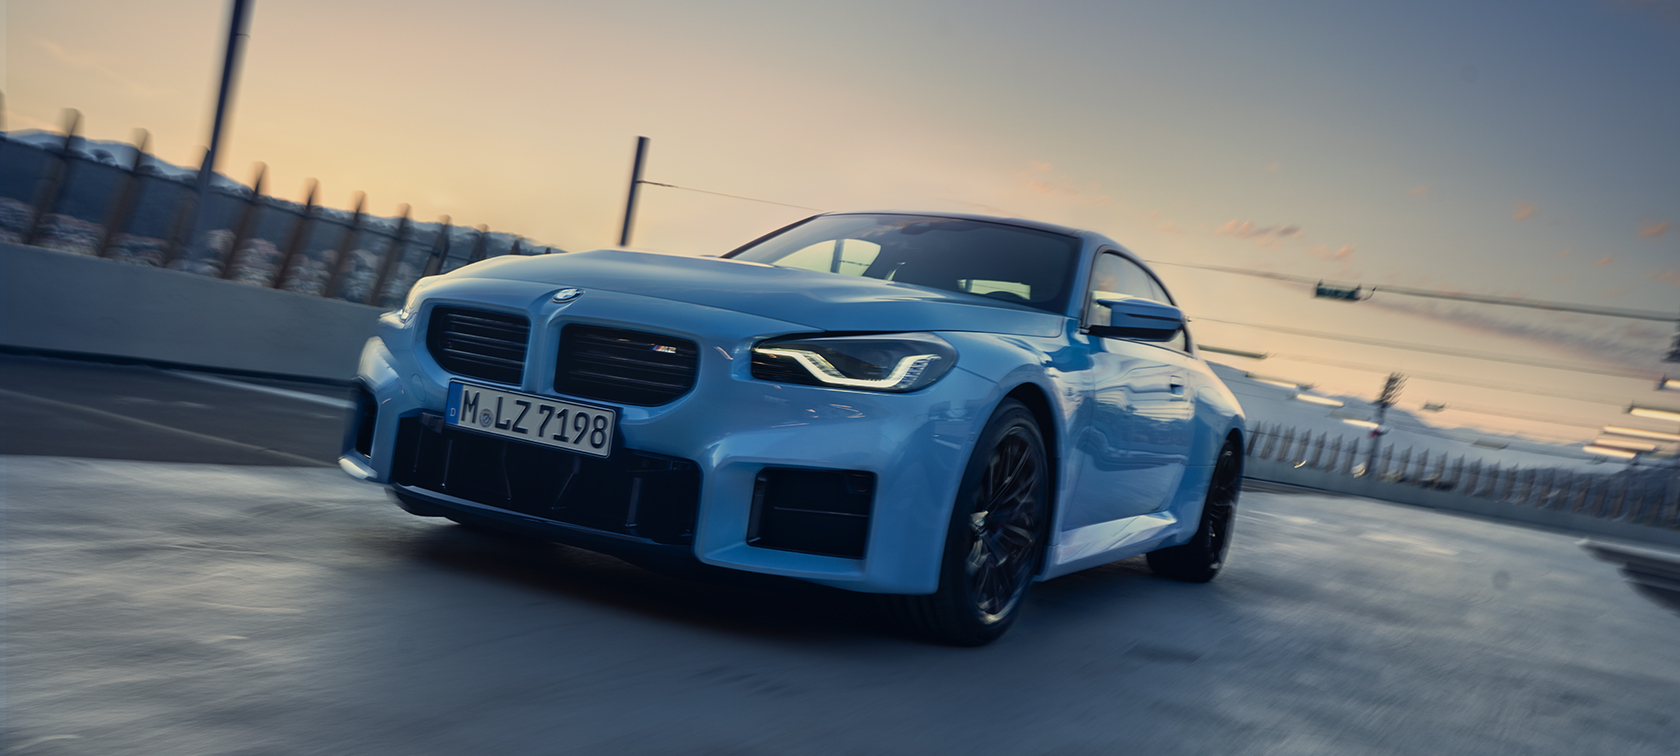 THE ALL-NEW BMW M2 COUPÉ